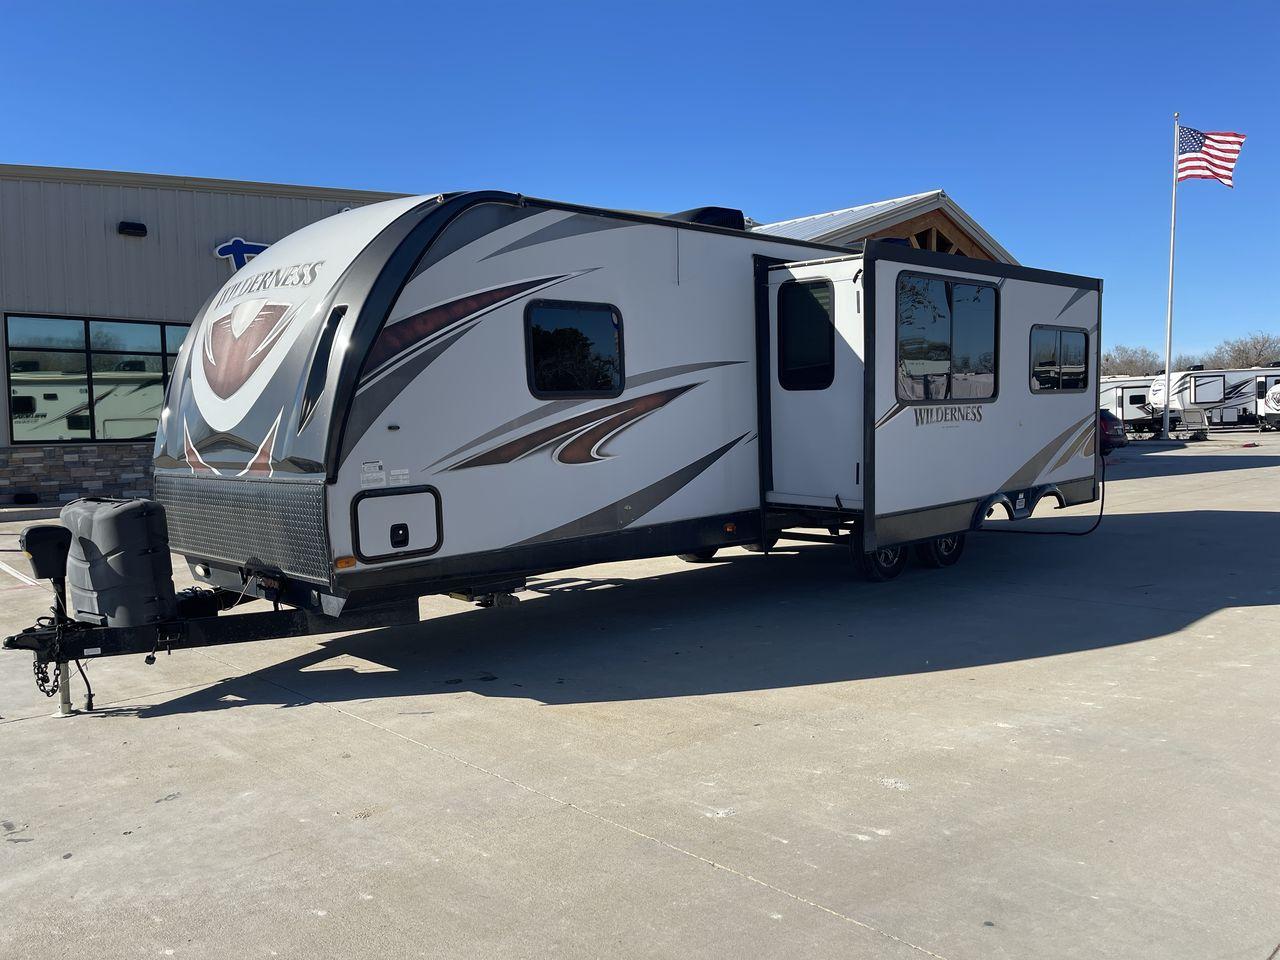 2018 GRAY HEARTLAND WILDERNESS USED 3125 (5SFNB3526JE) , Length: 35.75 ft. | Dry Weight: 6,840 lbs. | Gross Weight: 8,600 lbs. | Slides: 1 transmission, located at 4319 N Main St, Cleburne, TX, 76033, (817) 678-5133, 32.385960, -97.391212 - Discover your inner adventurer with the Heartland Wilderness 3125 travel trailer from 2018. This RV offers the ideal balance of roomy living, contemporary conveniences, and tough sturdiness for your outdoor adventures. It is designed for individuals who desire both comfort and exploration. The dimen - Photo #23